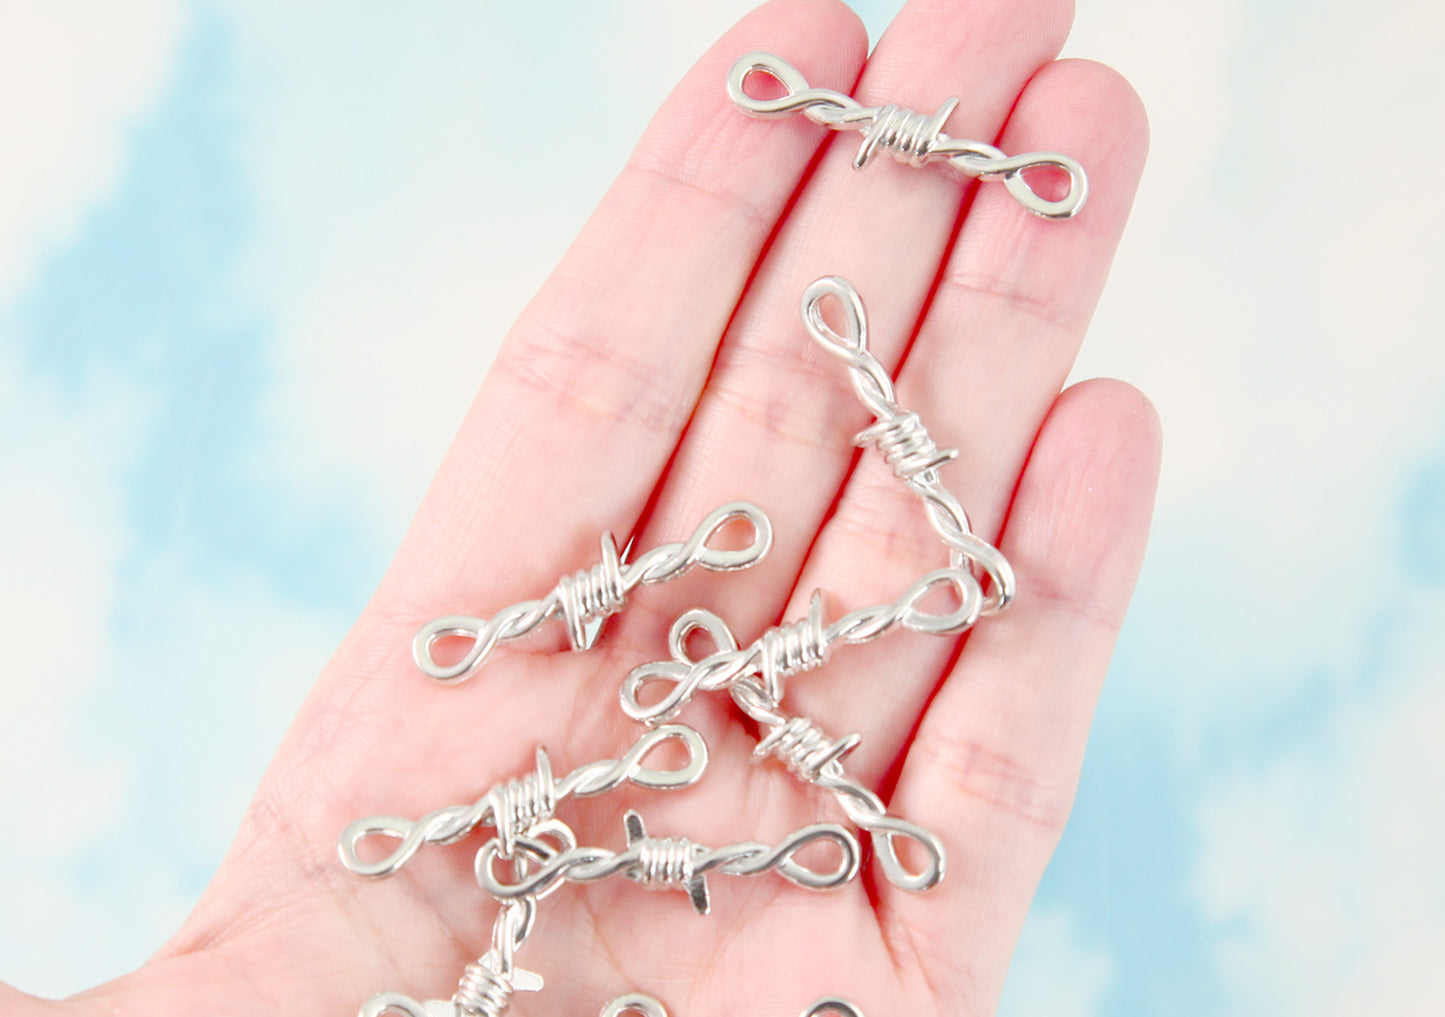 34mm Metal Barbed Wire Charms - 12 pc set - Barb Wire Link Charm - Easily Connect to make a Necklace